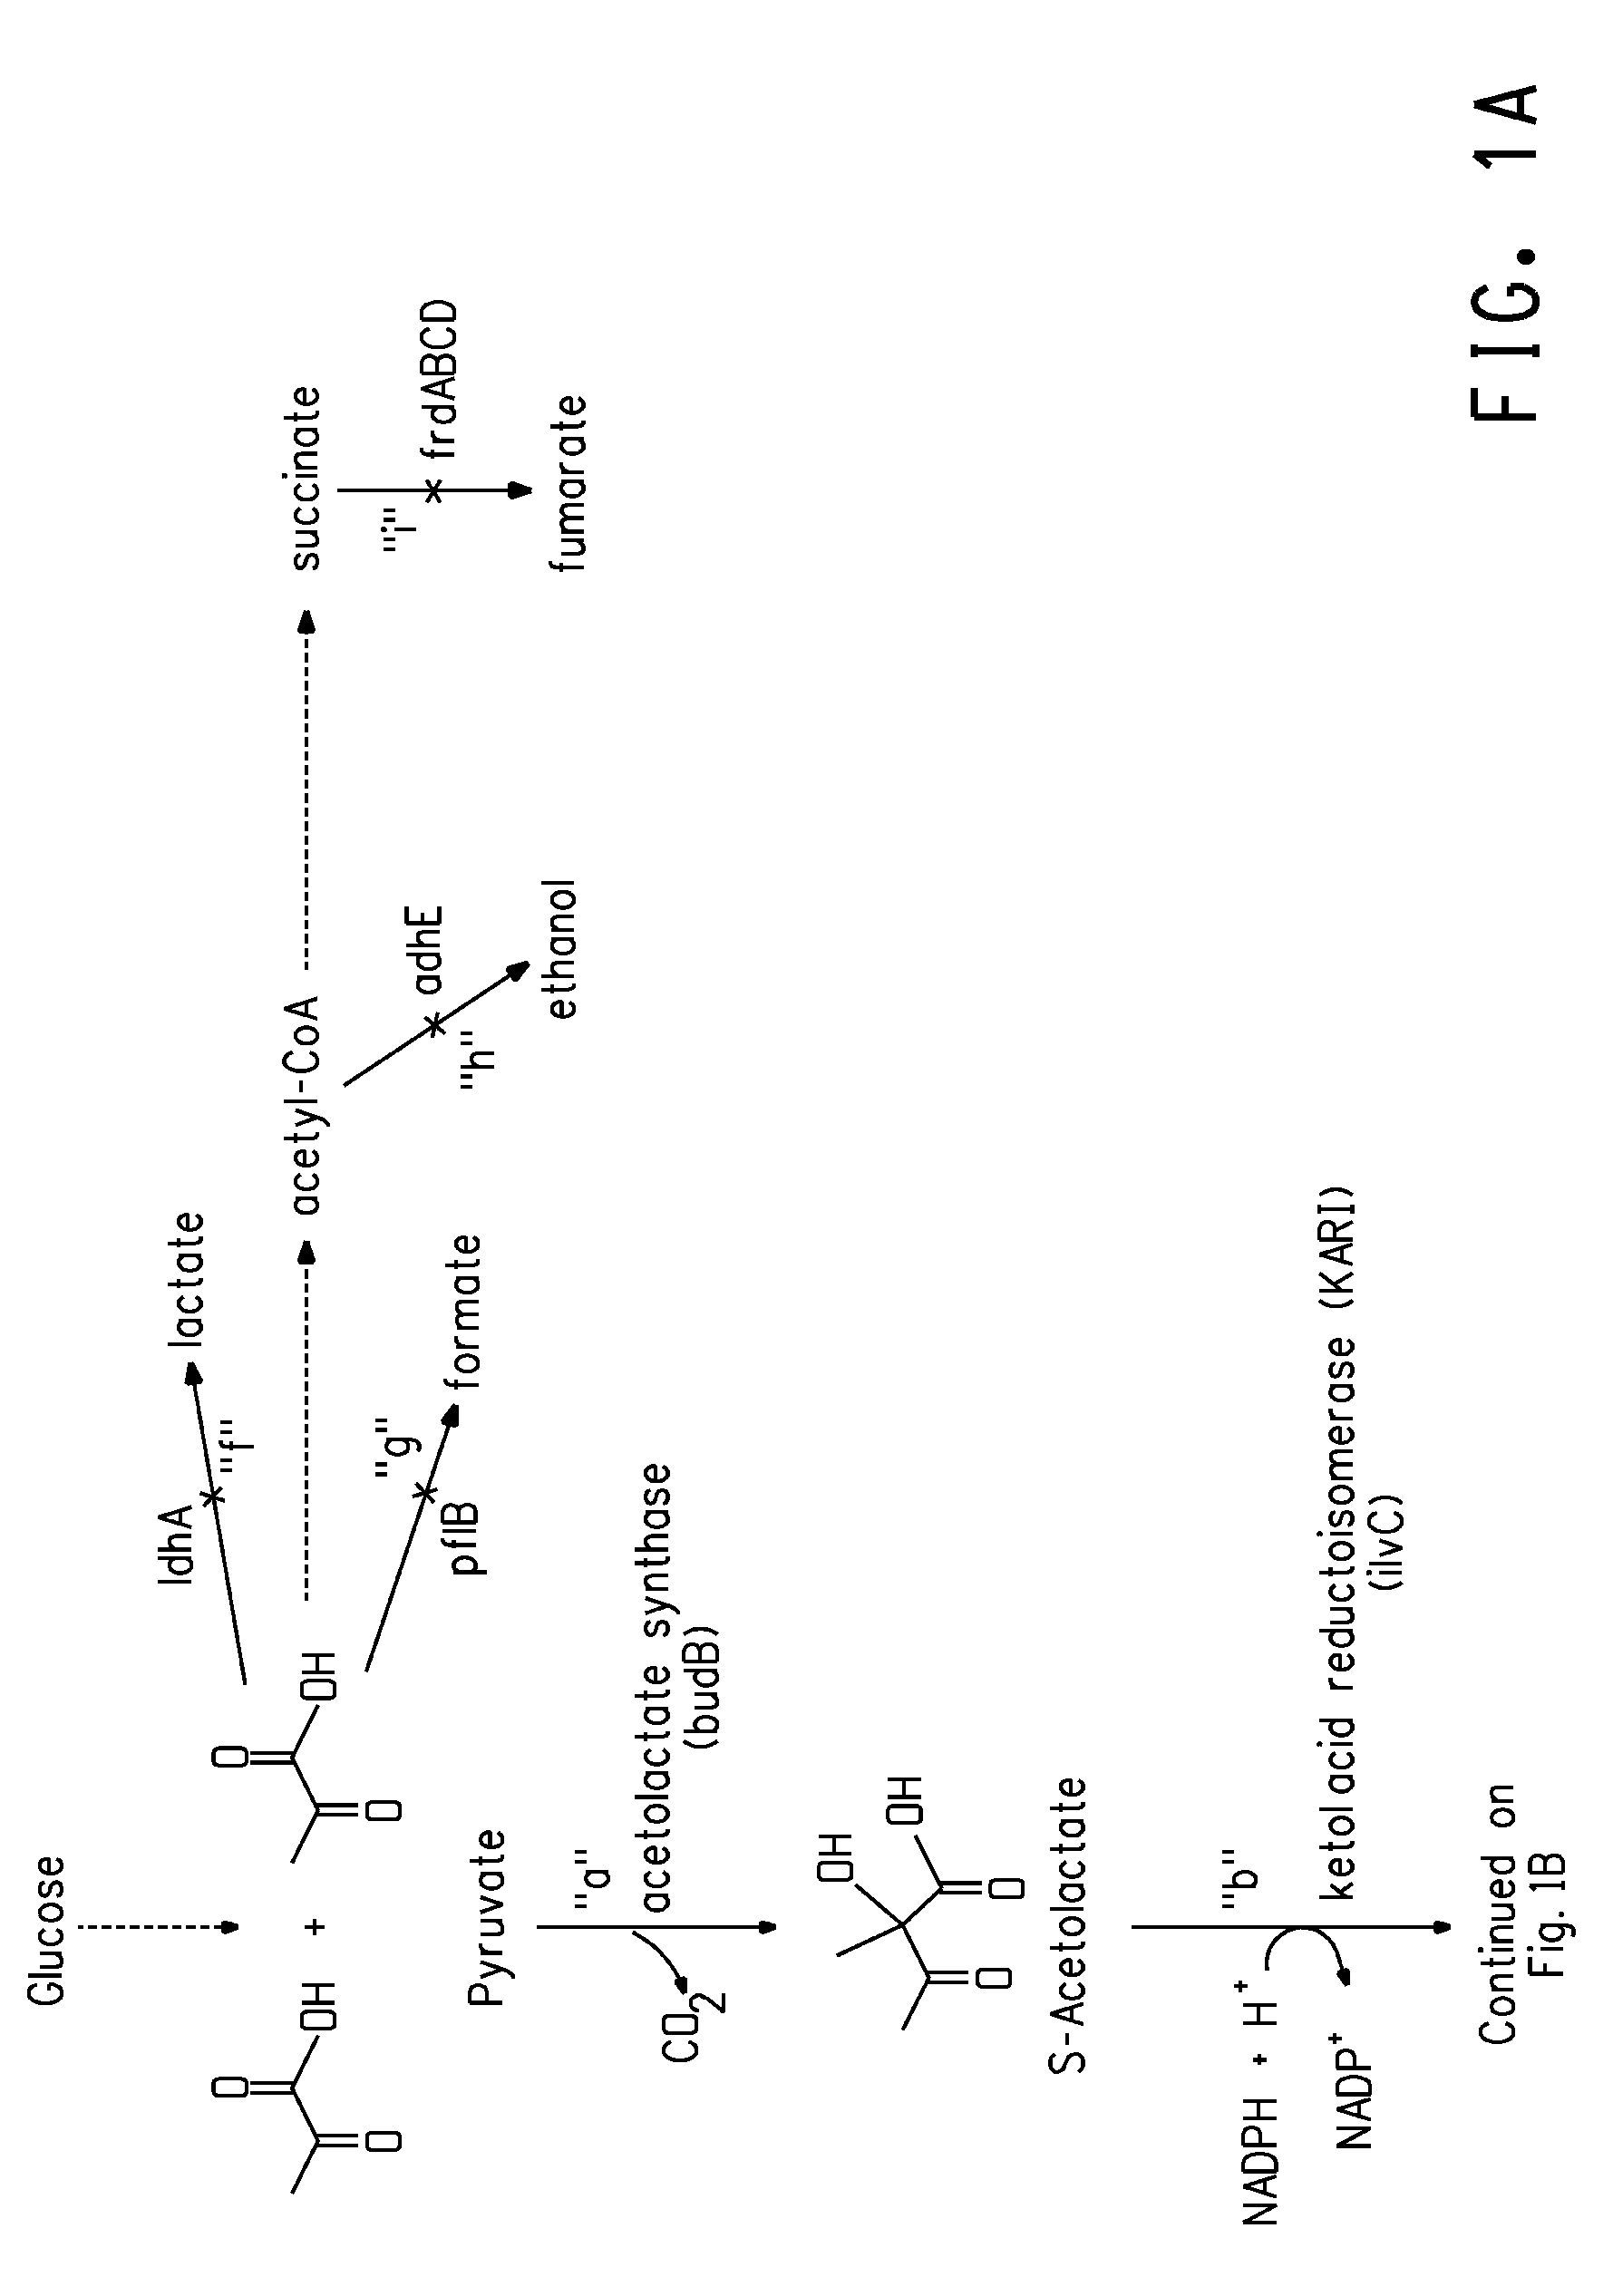 Deletion mutants for the production of isobutanol